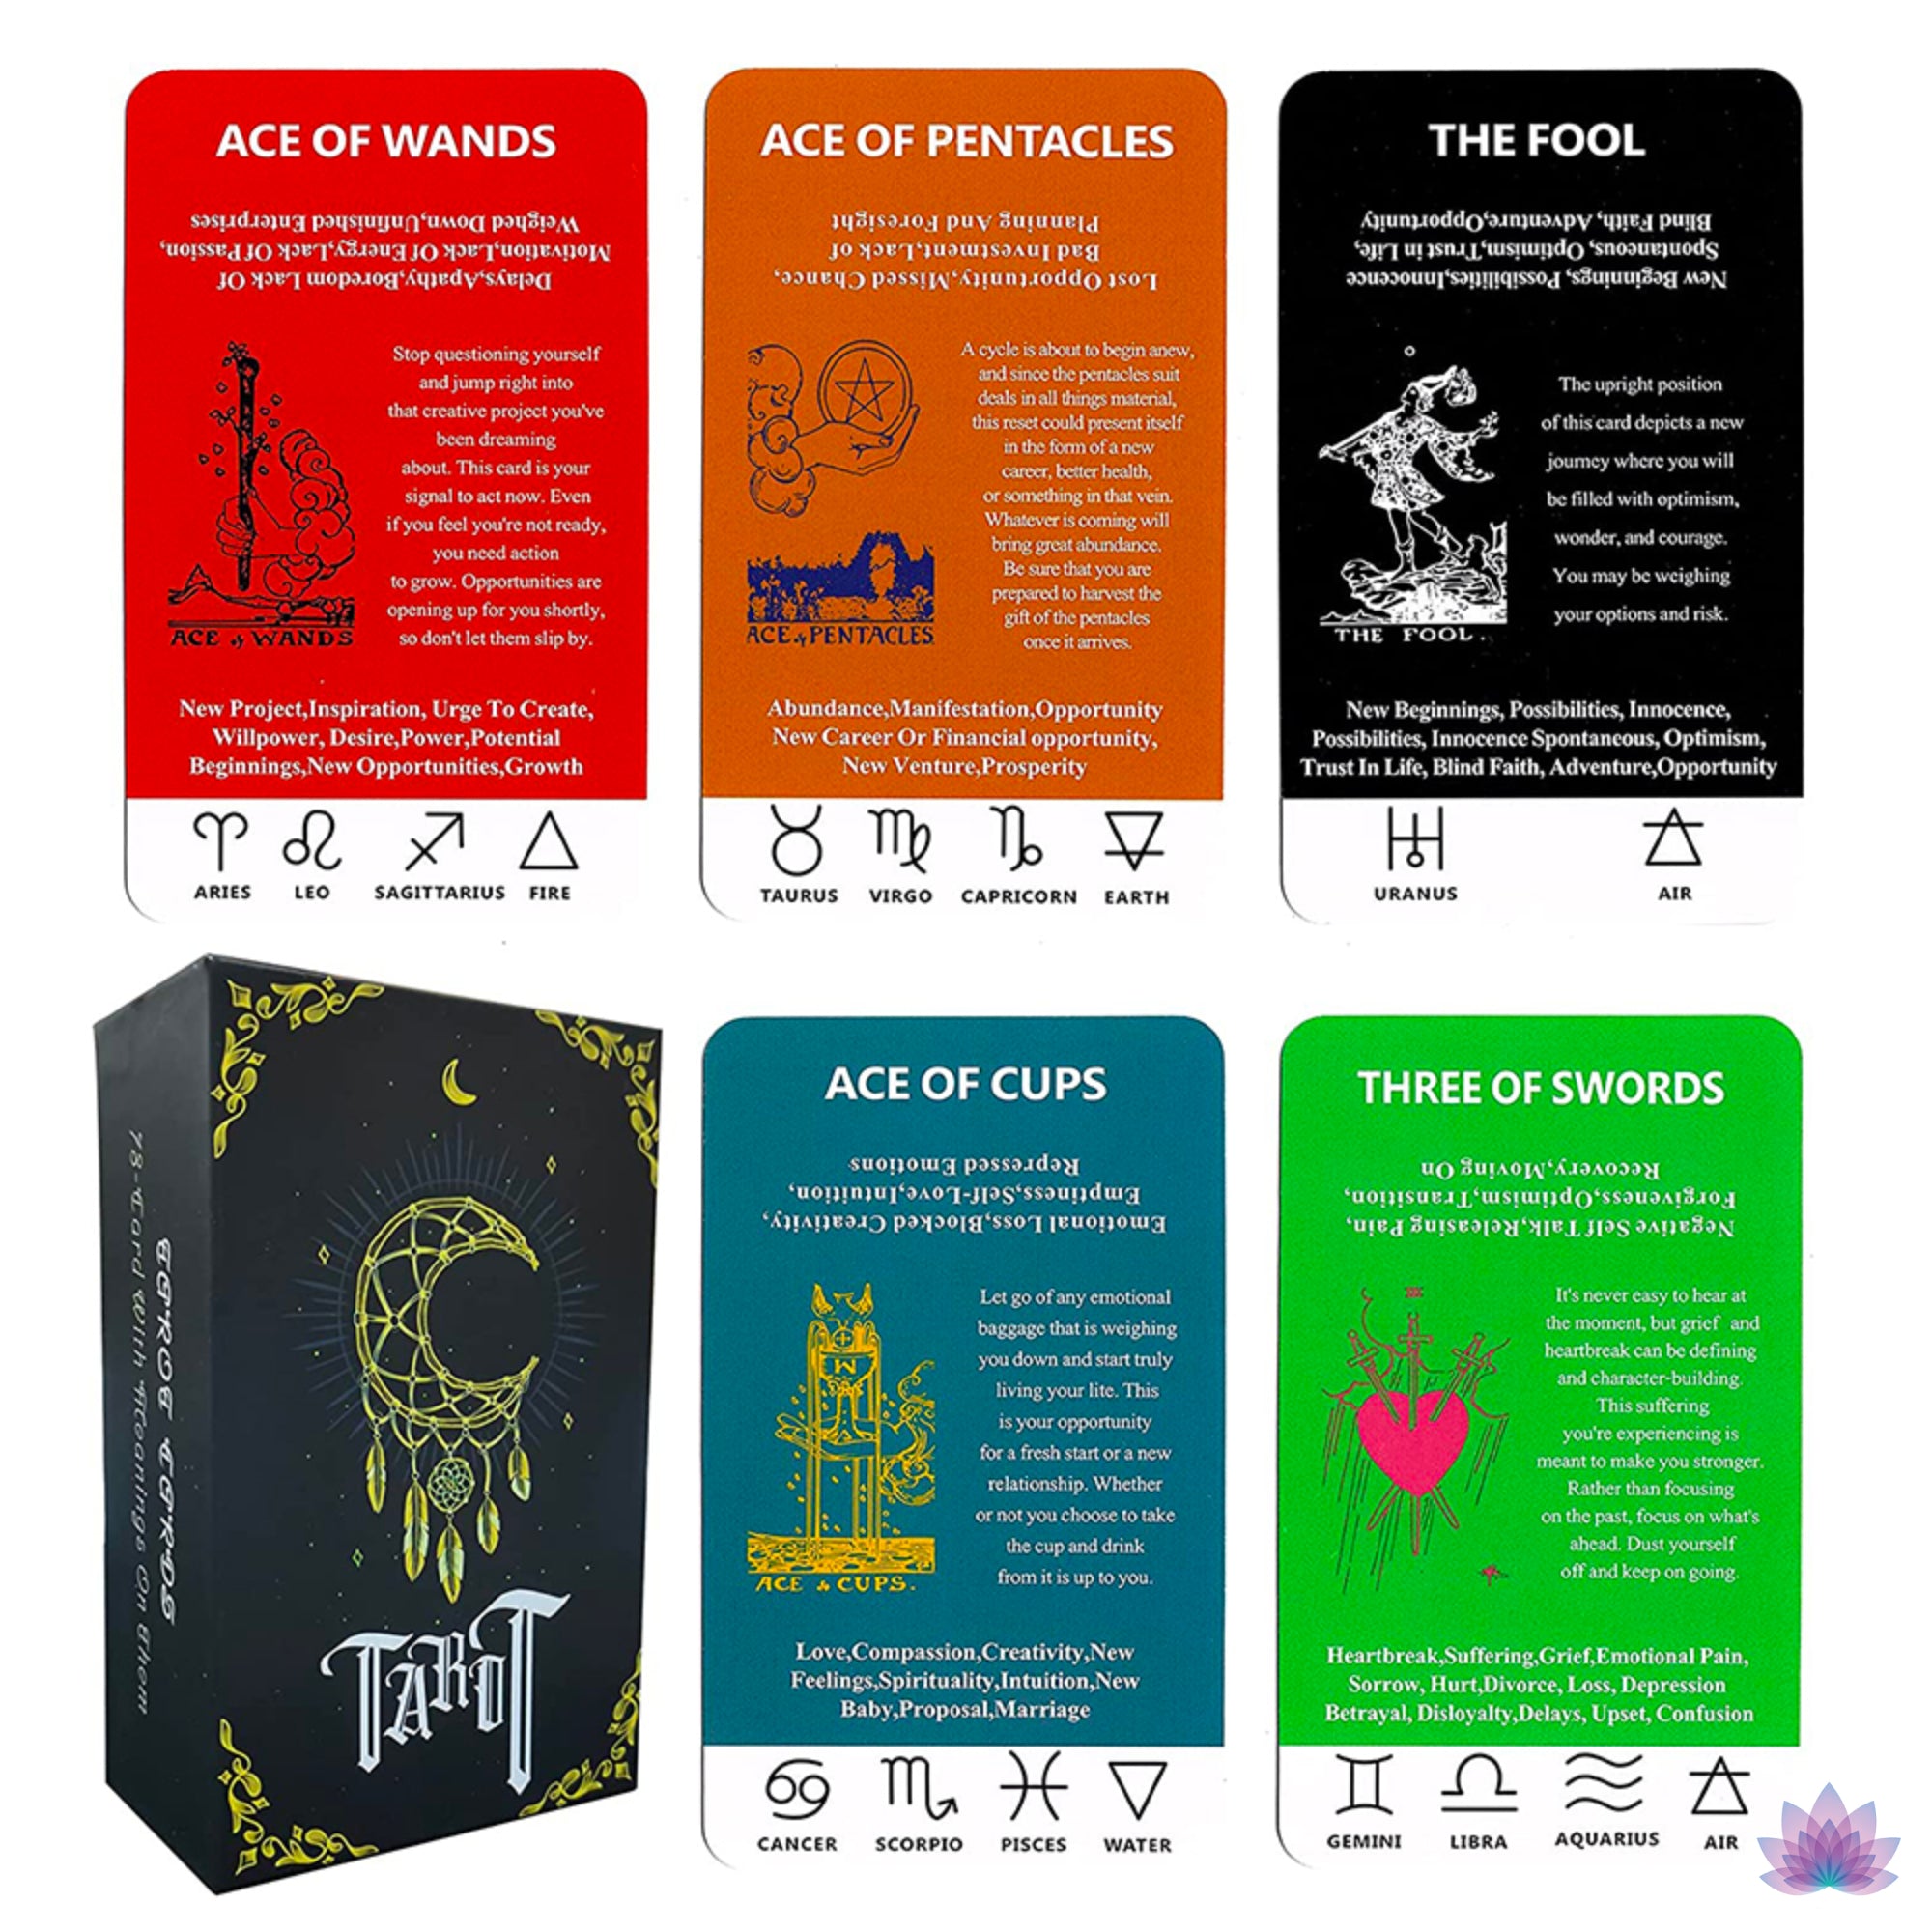 Classic Tarot Cards For Beginner Reader | High-End Tarot Deck With Guidebook | Spiritual Gift For Newbie Divination Witch | Apollo Tarot Shop